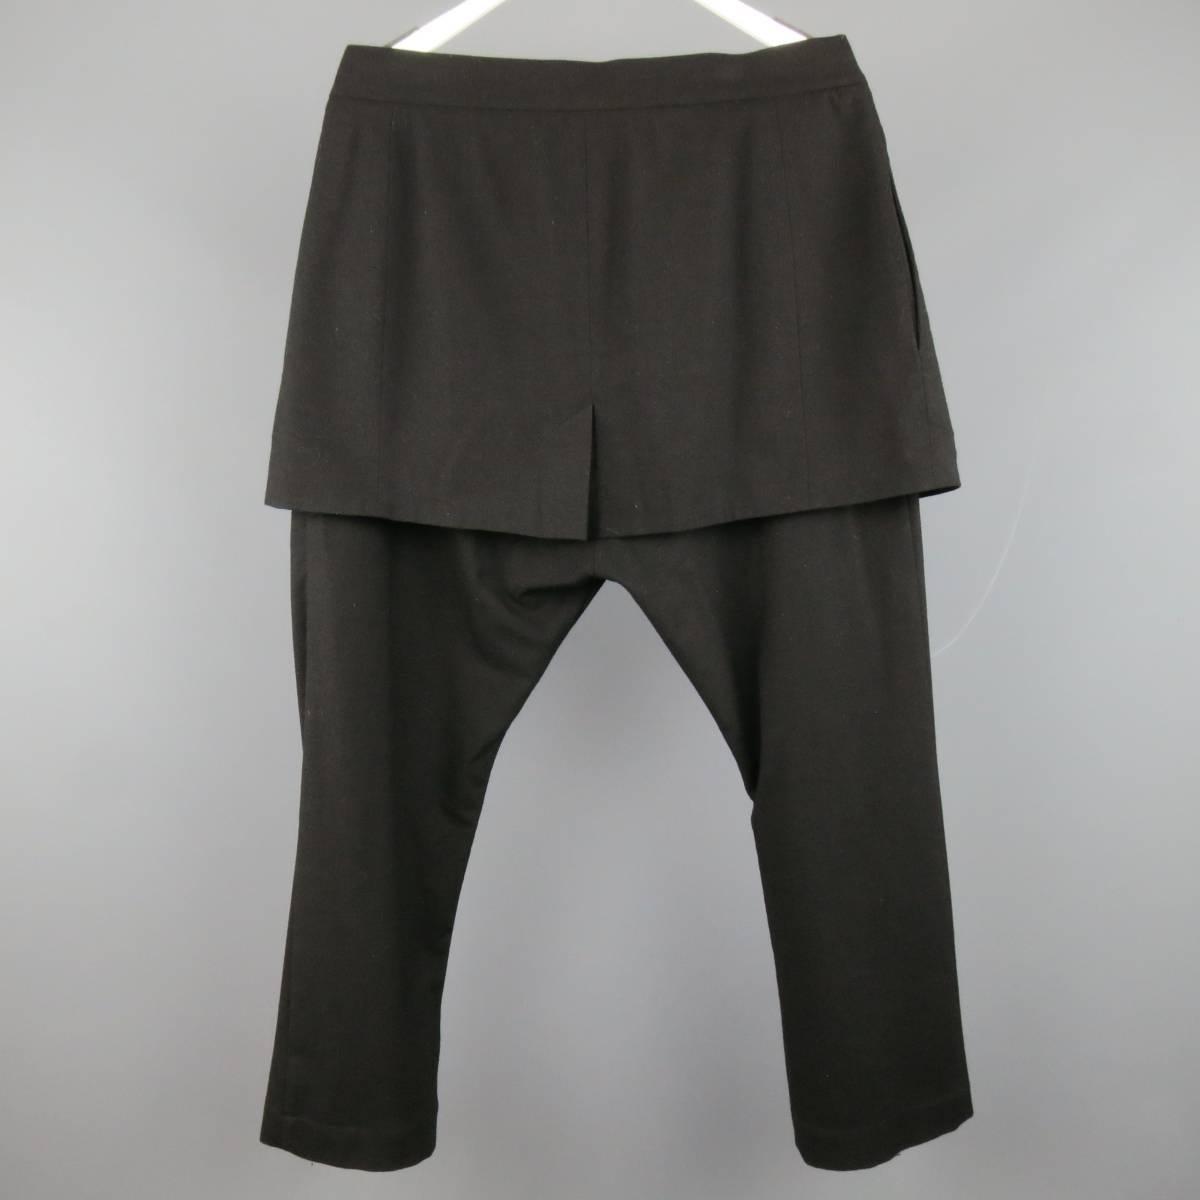 mens pants with skirt overlay